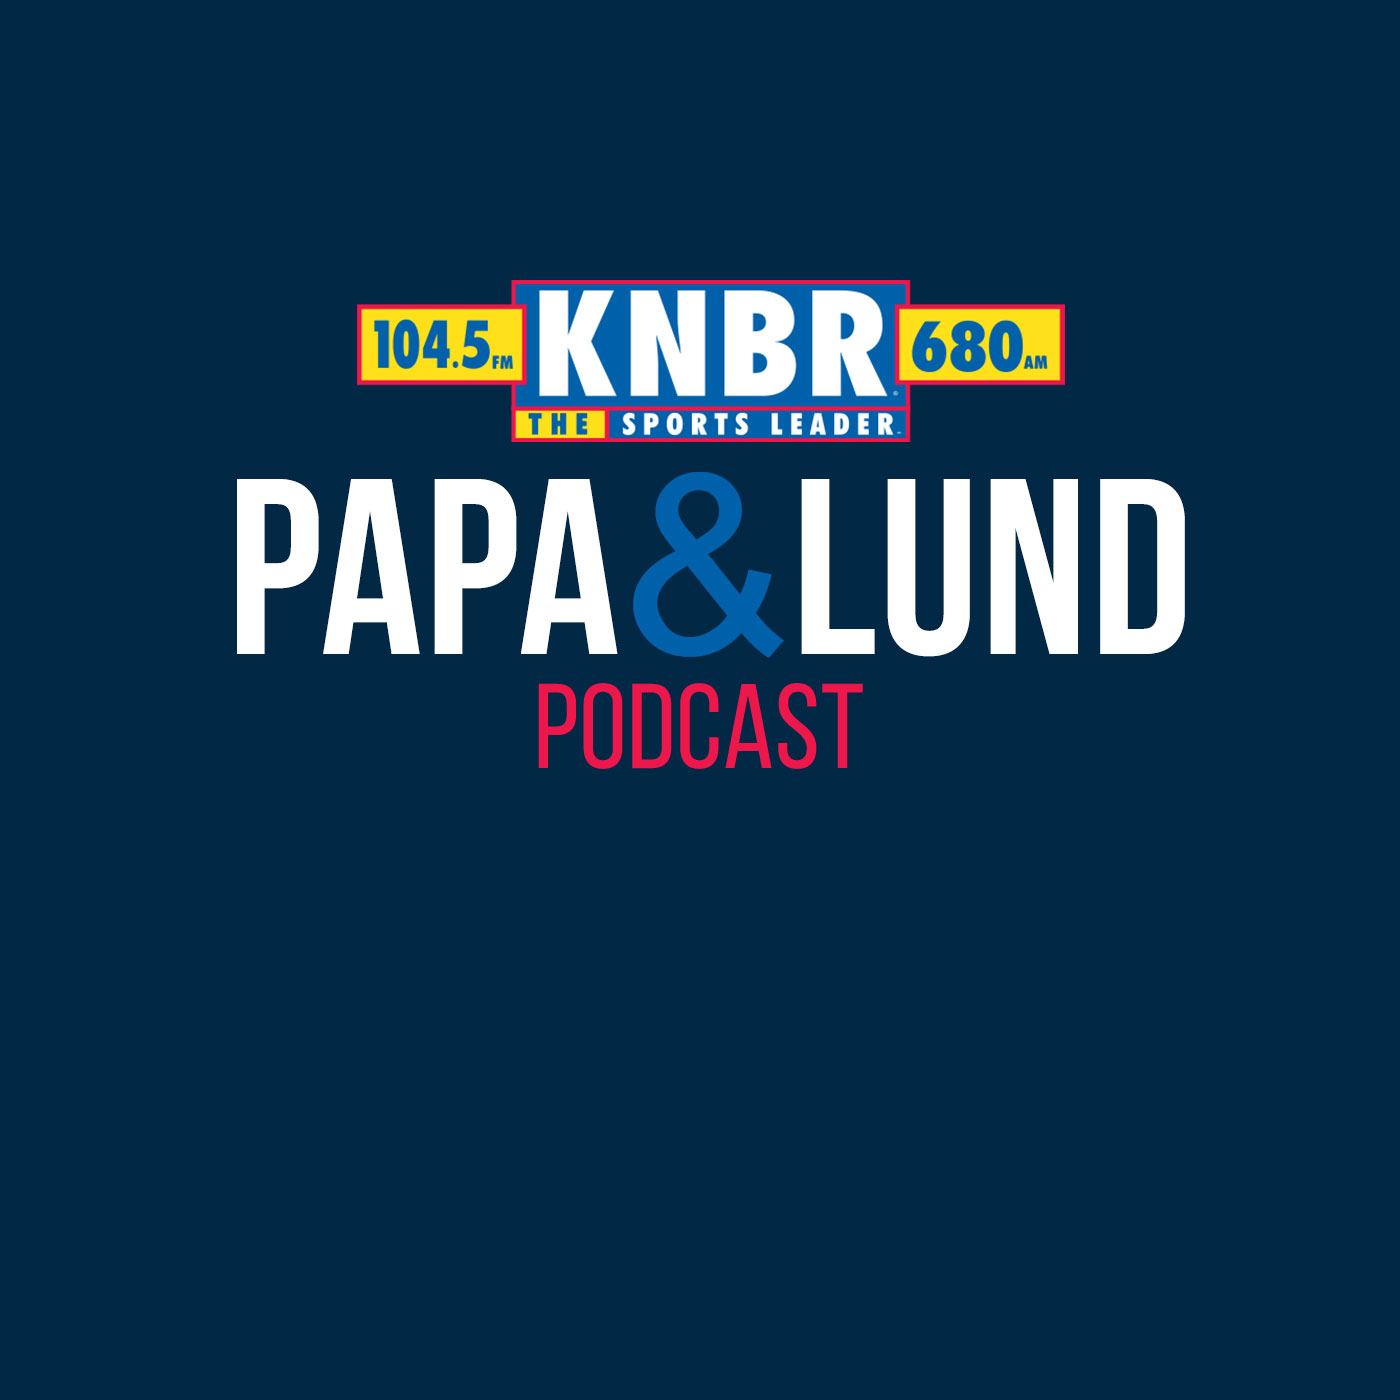 4-25 Chris Biderman joins Papa & Lund to discuss De'Aaron Fox's apparent injury and whether or not his Game 5 status is in jeopardy